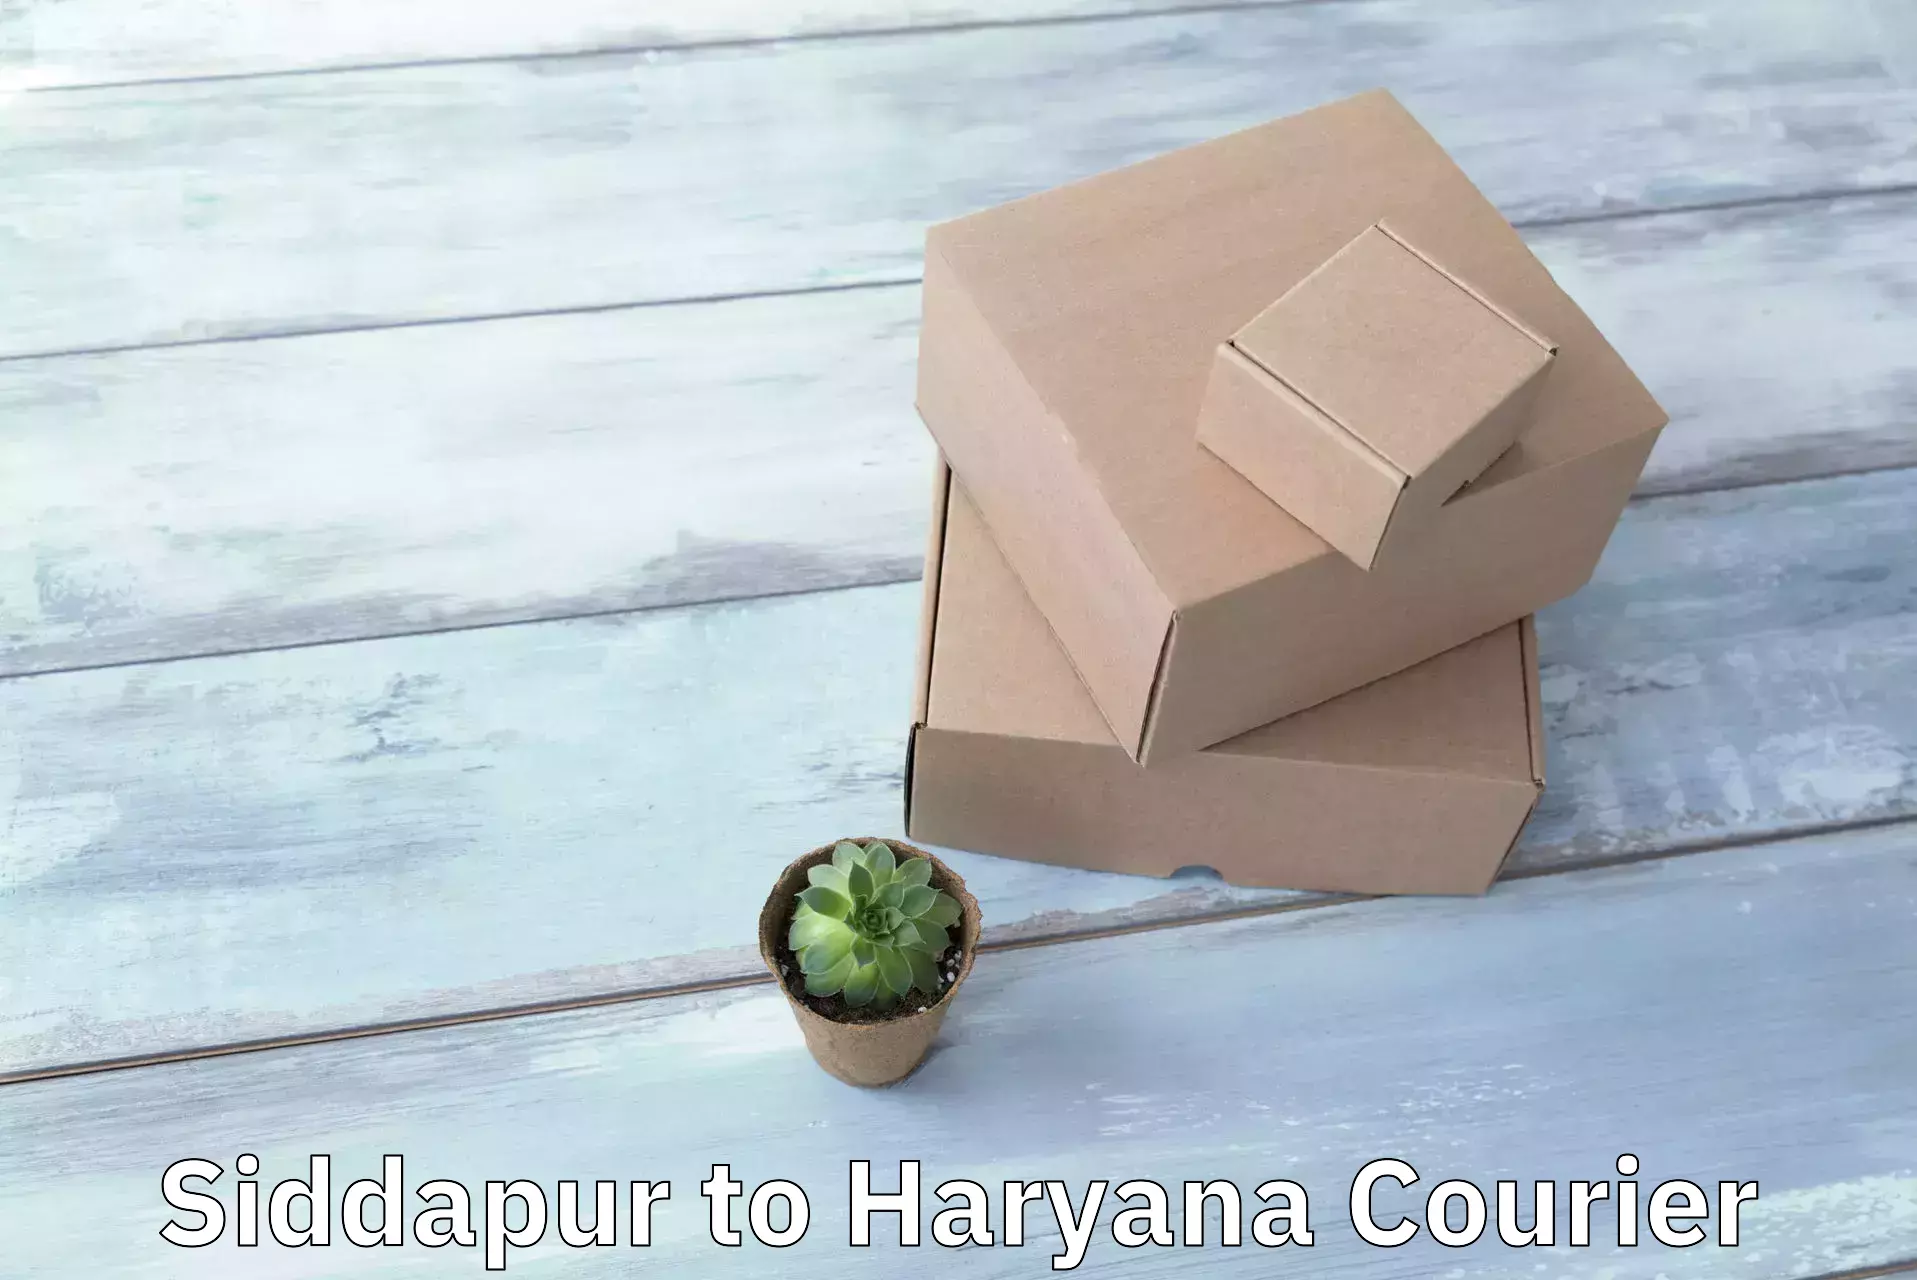 Courier service comparison Siddapur to NCR Haryana